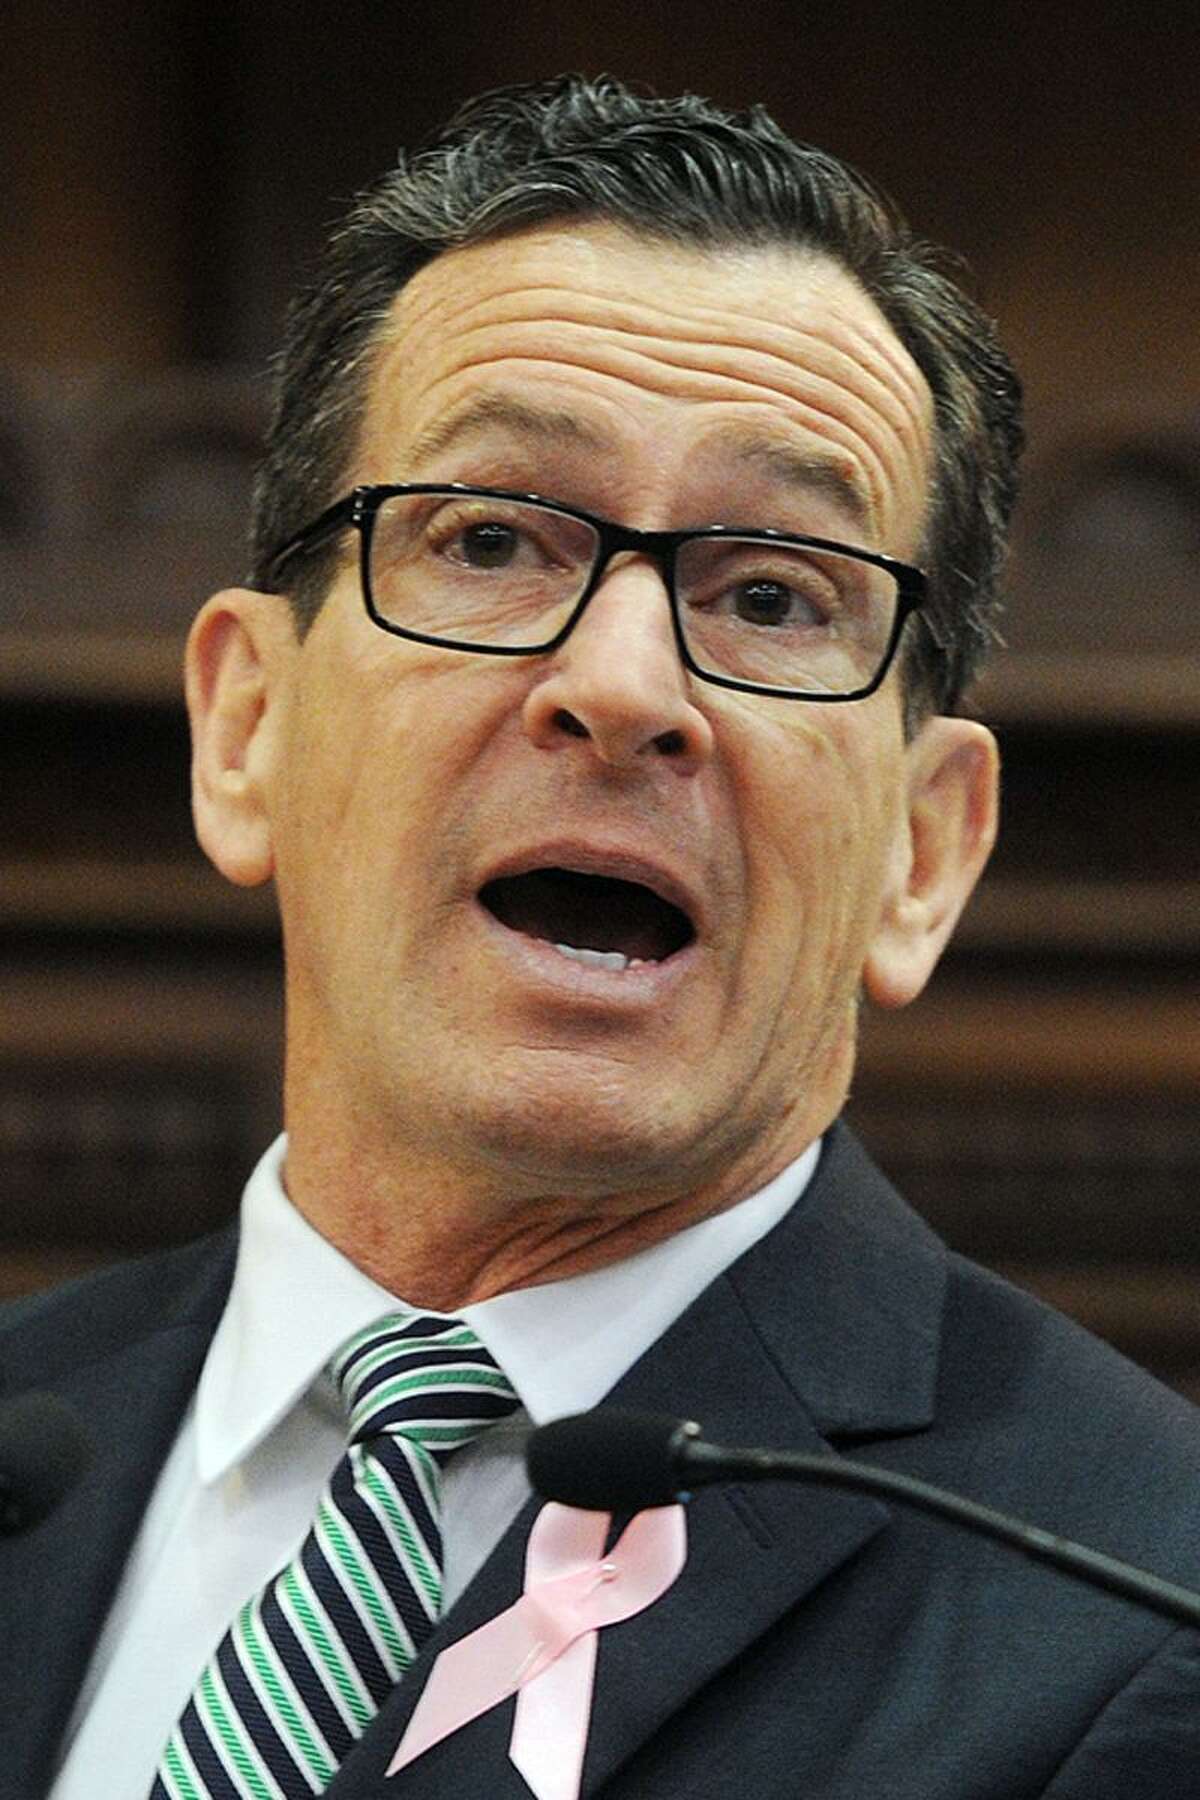 Governor Dannel P. Malloy speaks at his annual State of the State address during the opening session of the state legislature at the Capitol in Hartford, Conn. on Wednesday, February 7, 2018.